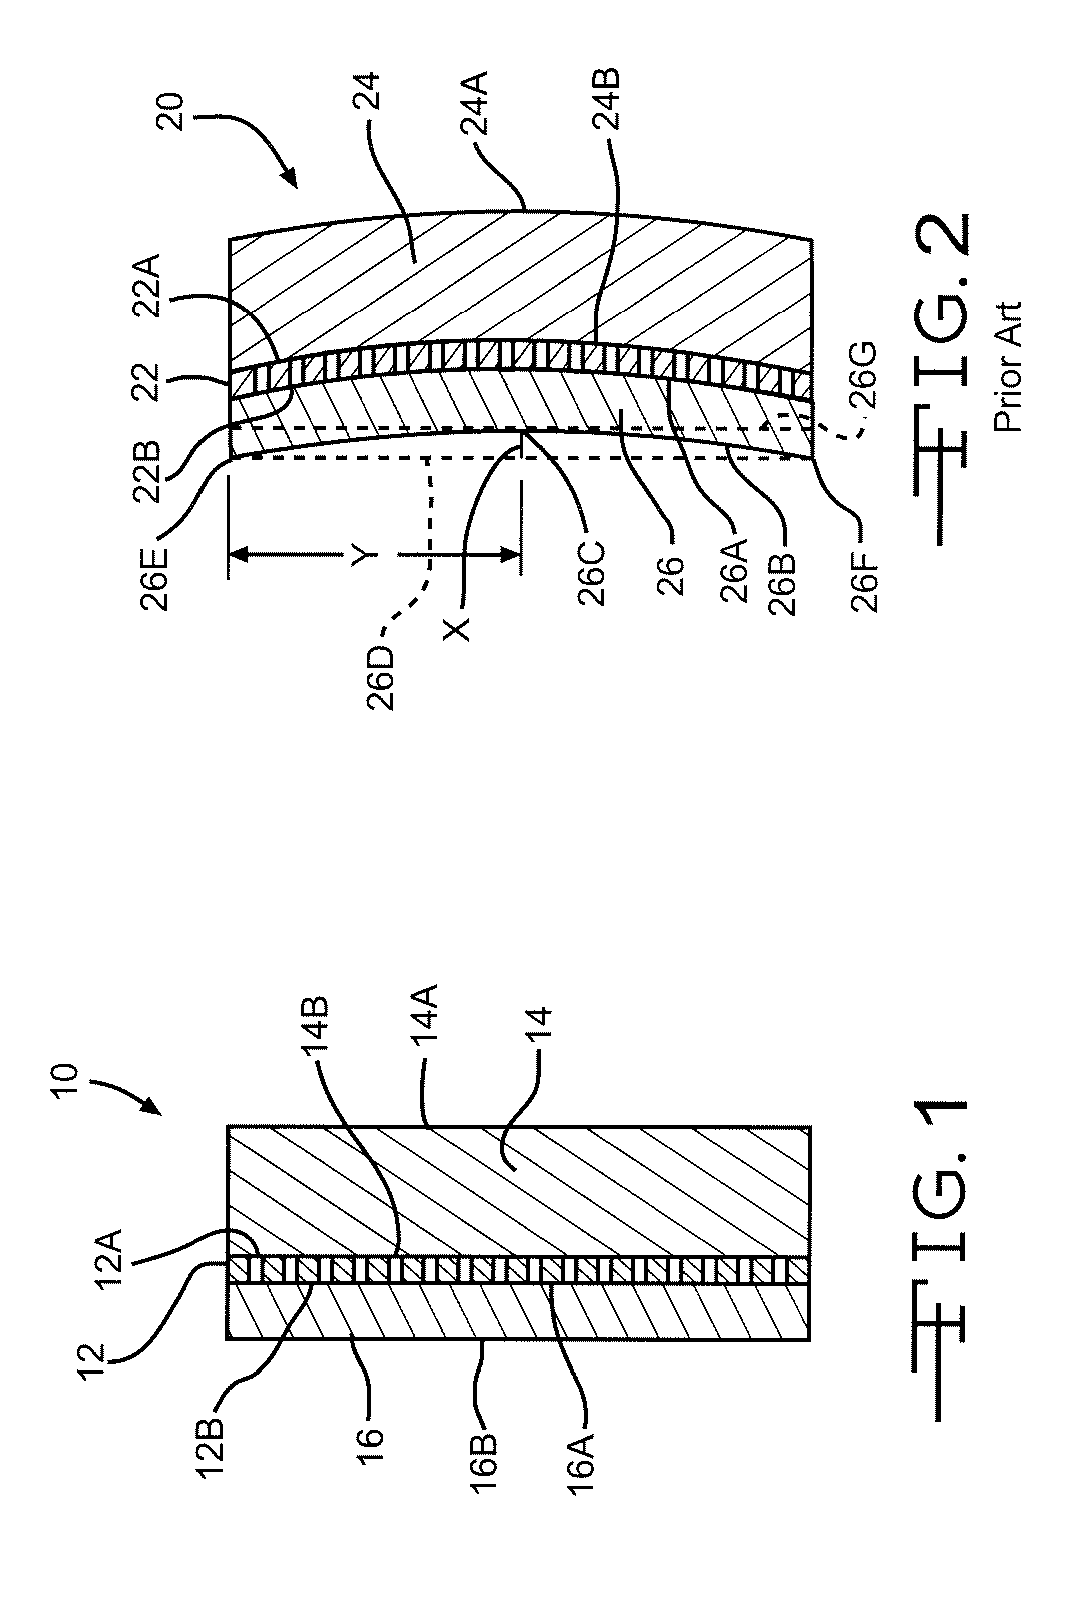 Method for making flat and high-density cathode for use in electrochemical cells